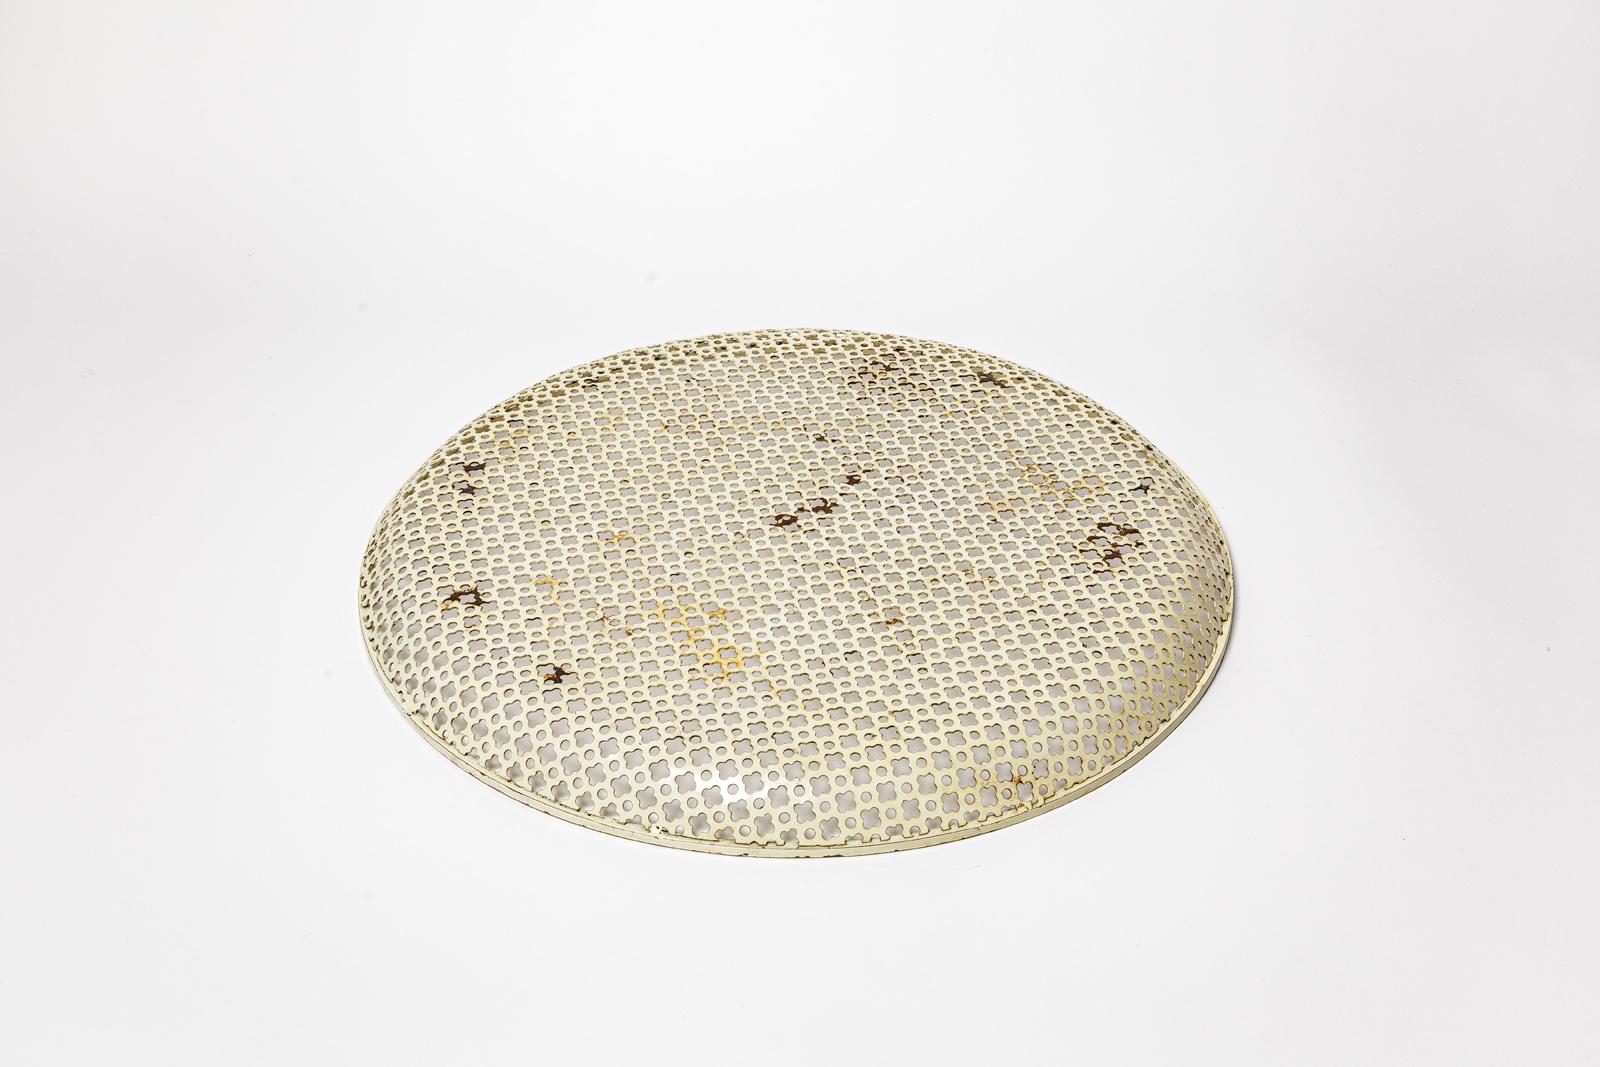 20th Century Mathieu Mategot large decorative white metal plate or basket or vide-poche 1950 For Sale